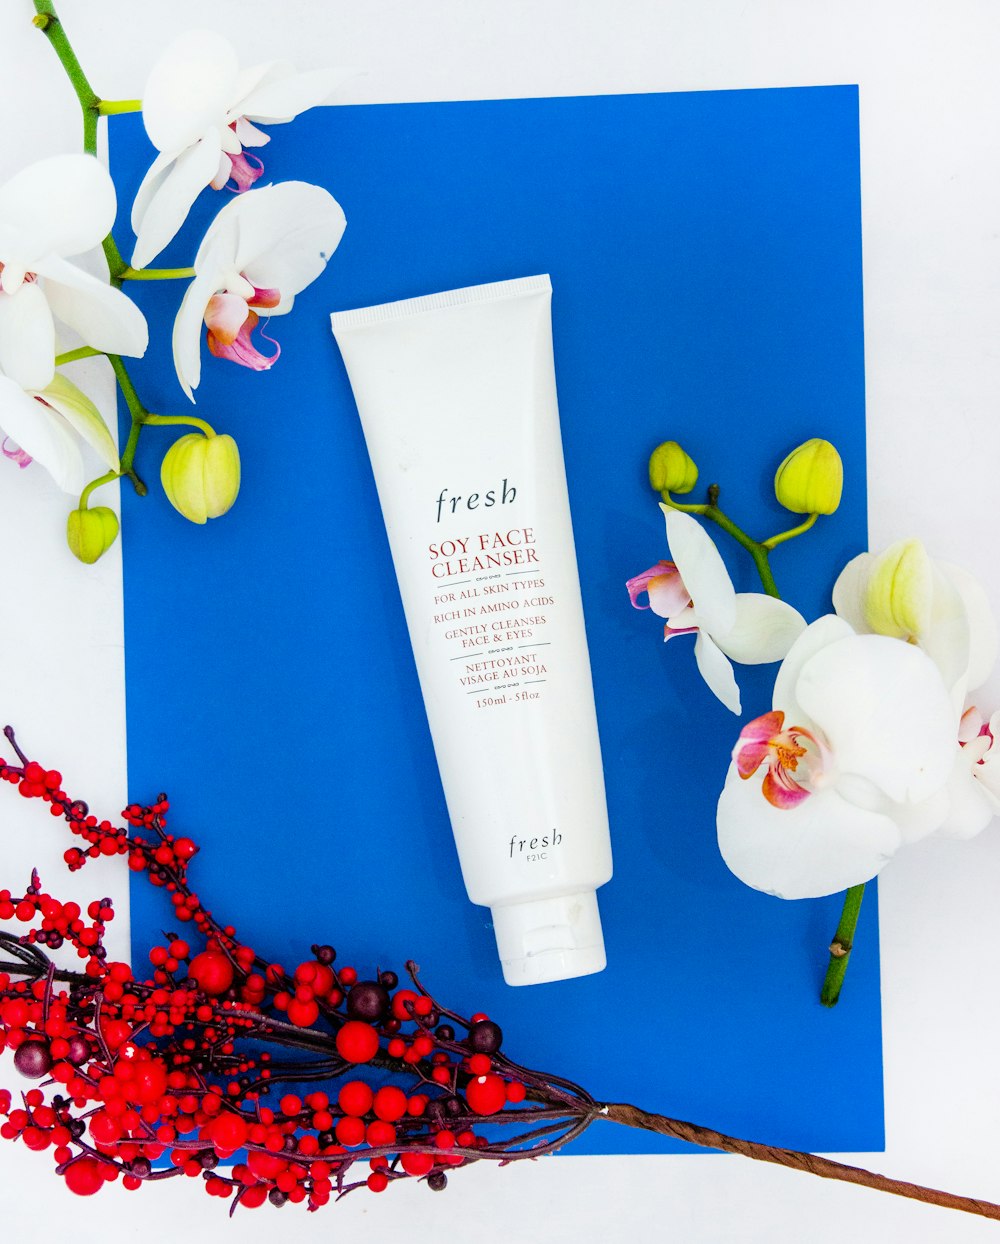 a tube of fresh soy face cream next to a bouquet of flowers